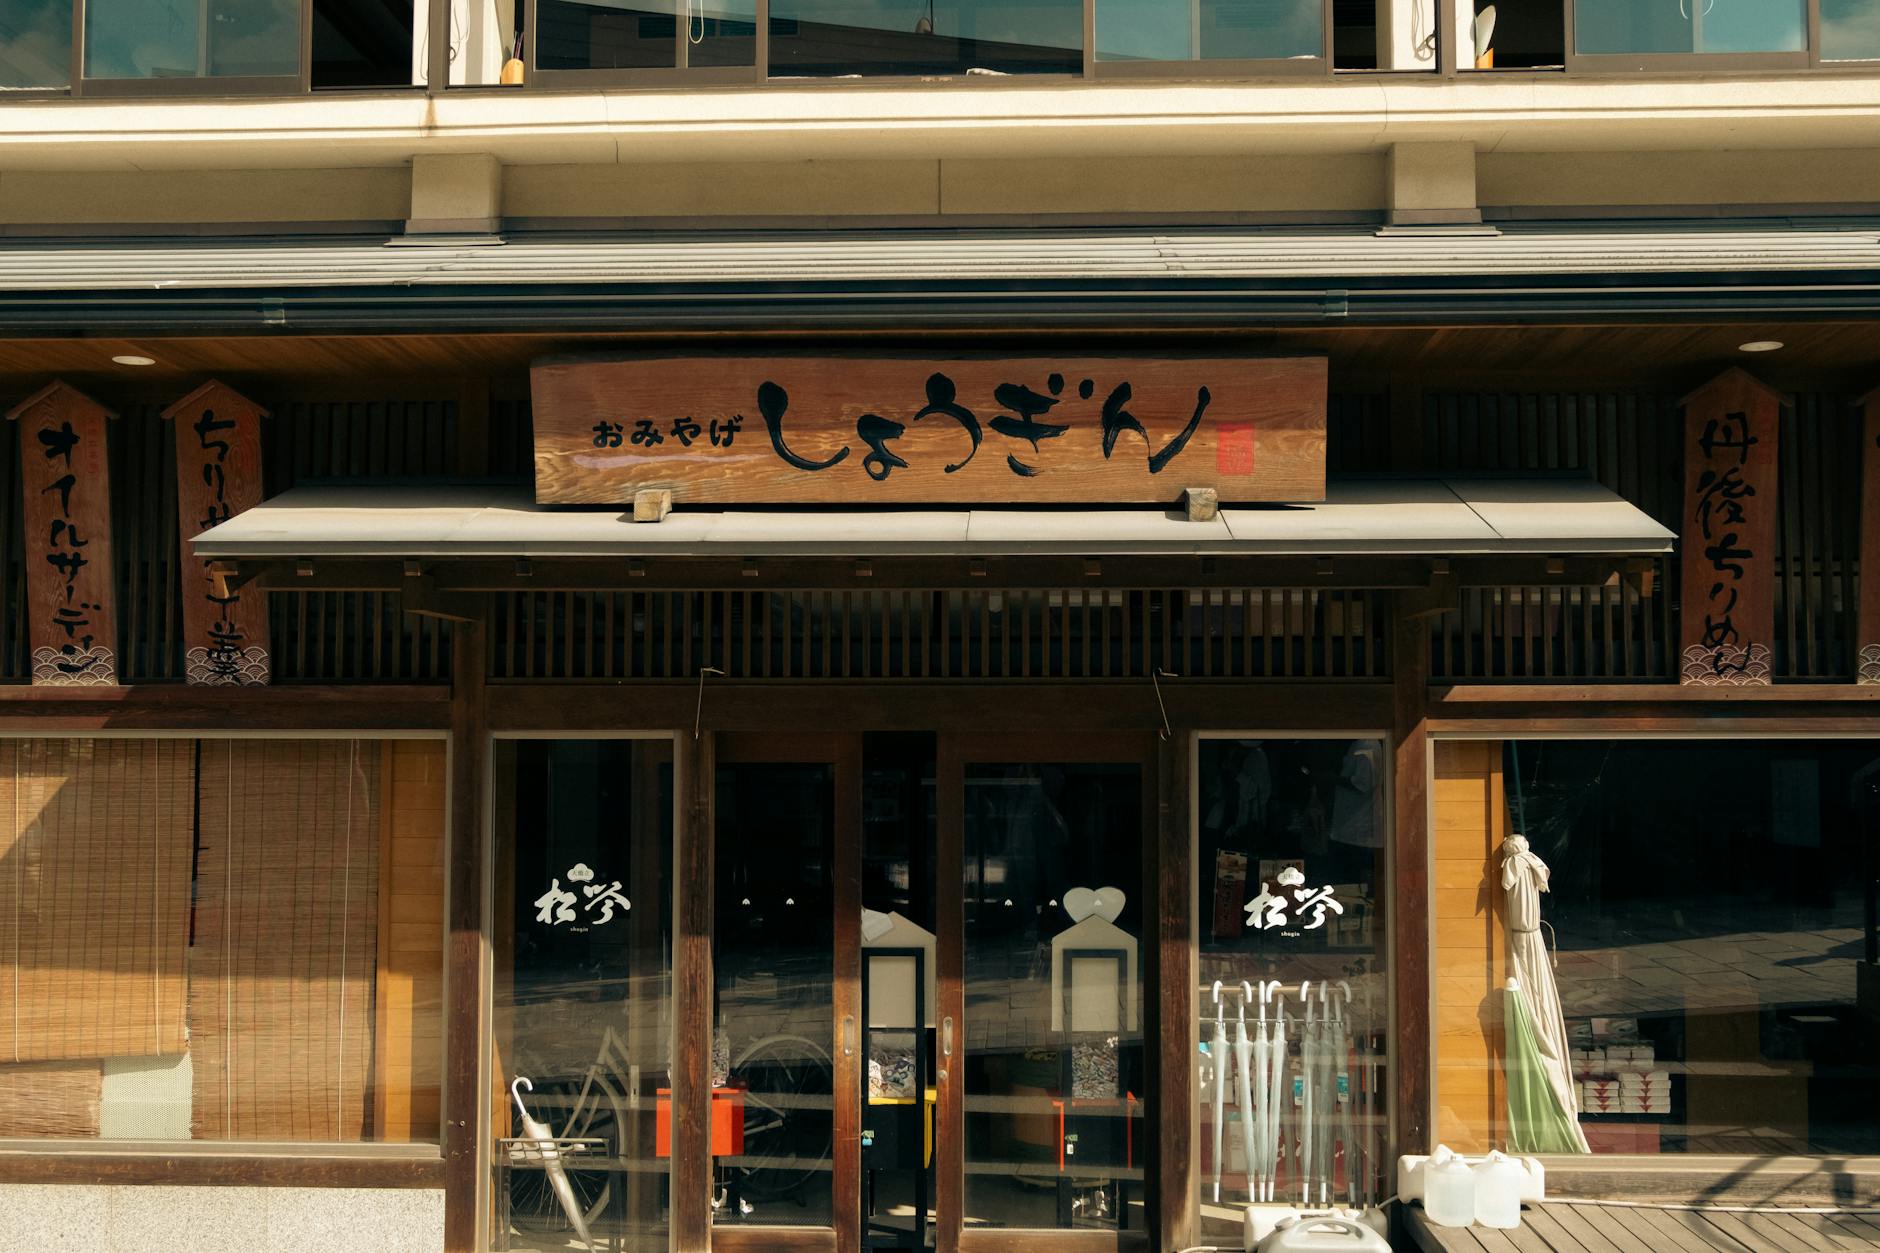 storefront in kyoto japan